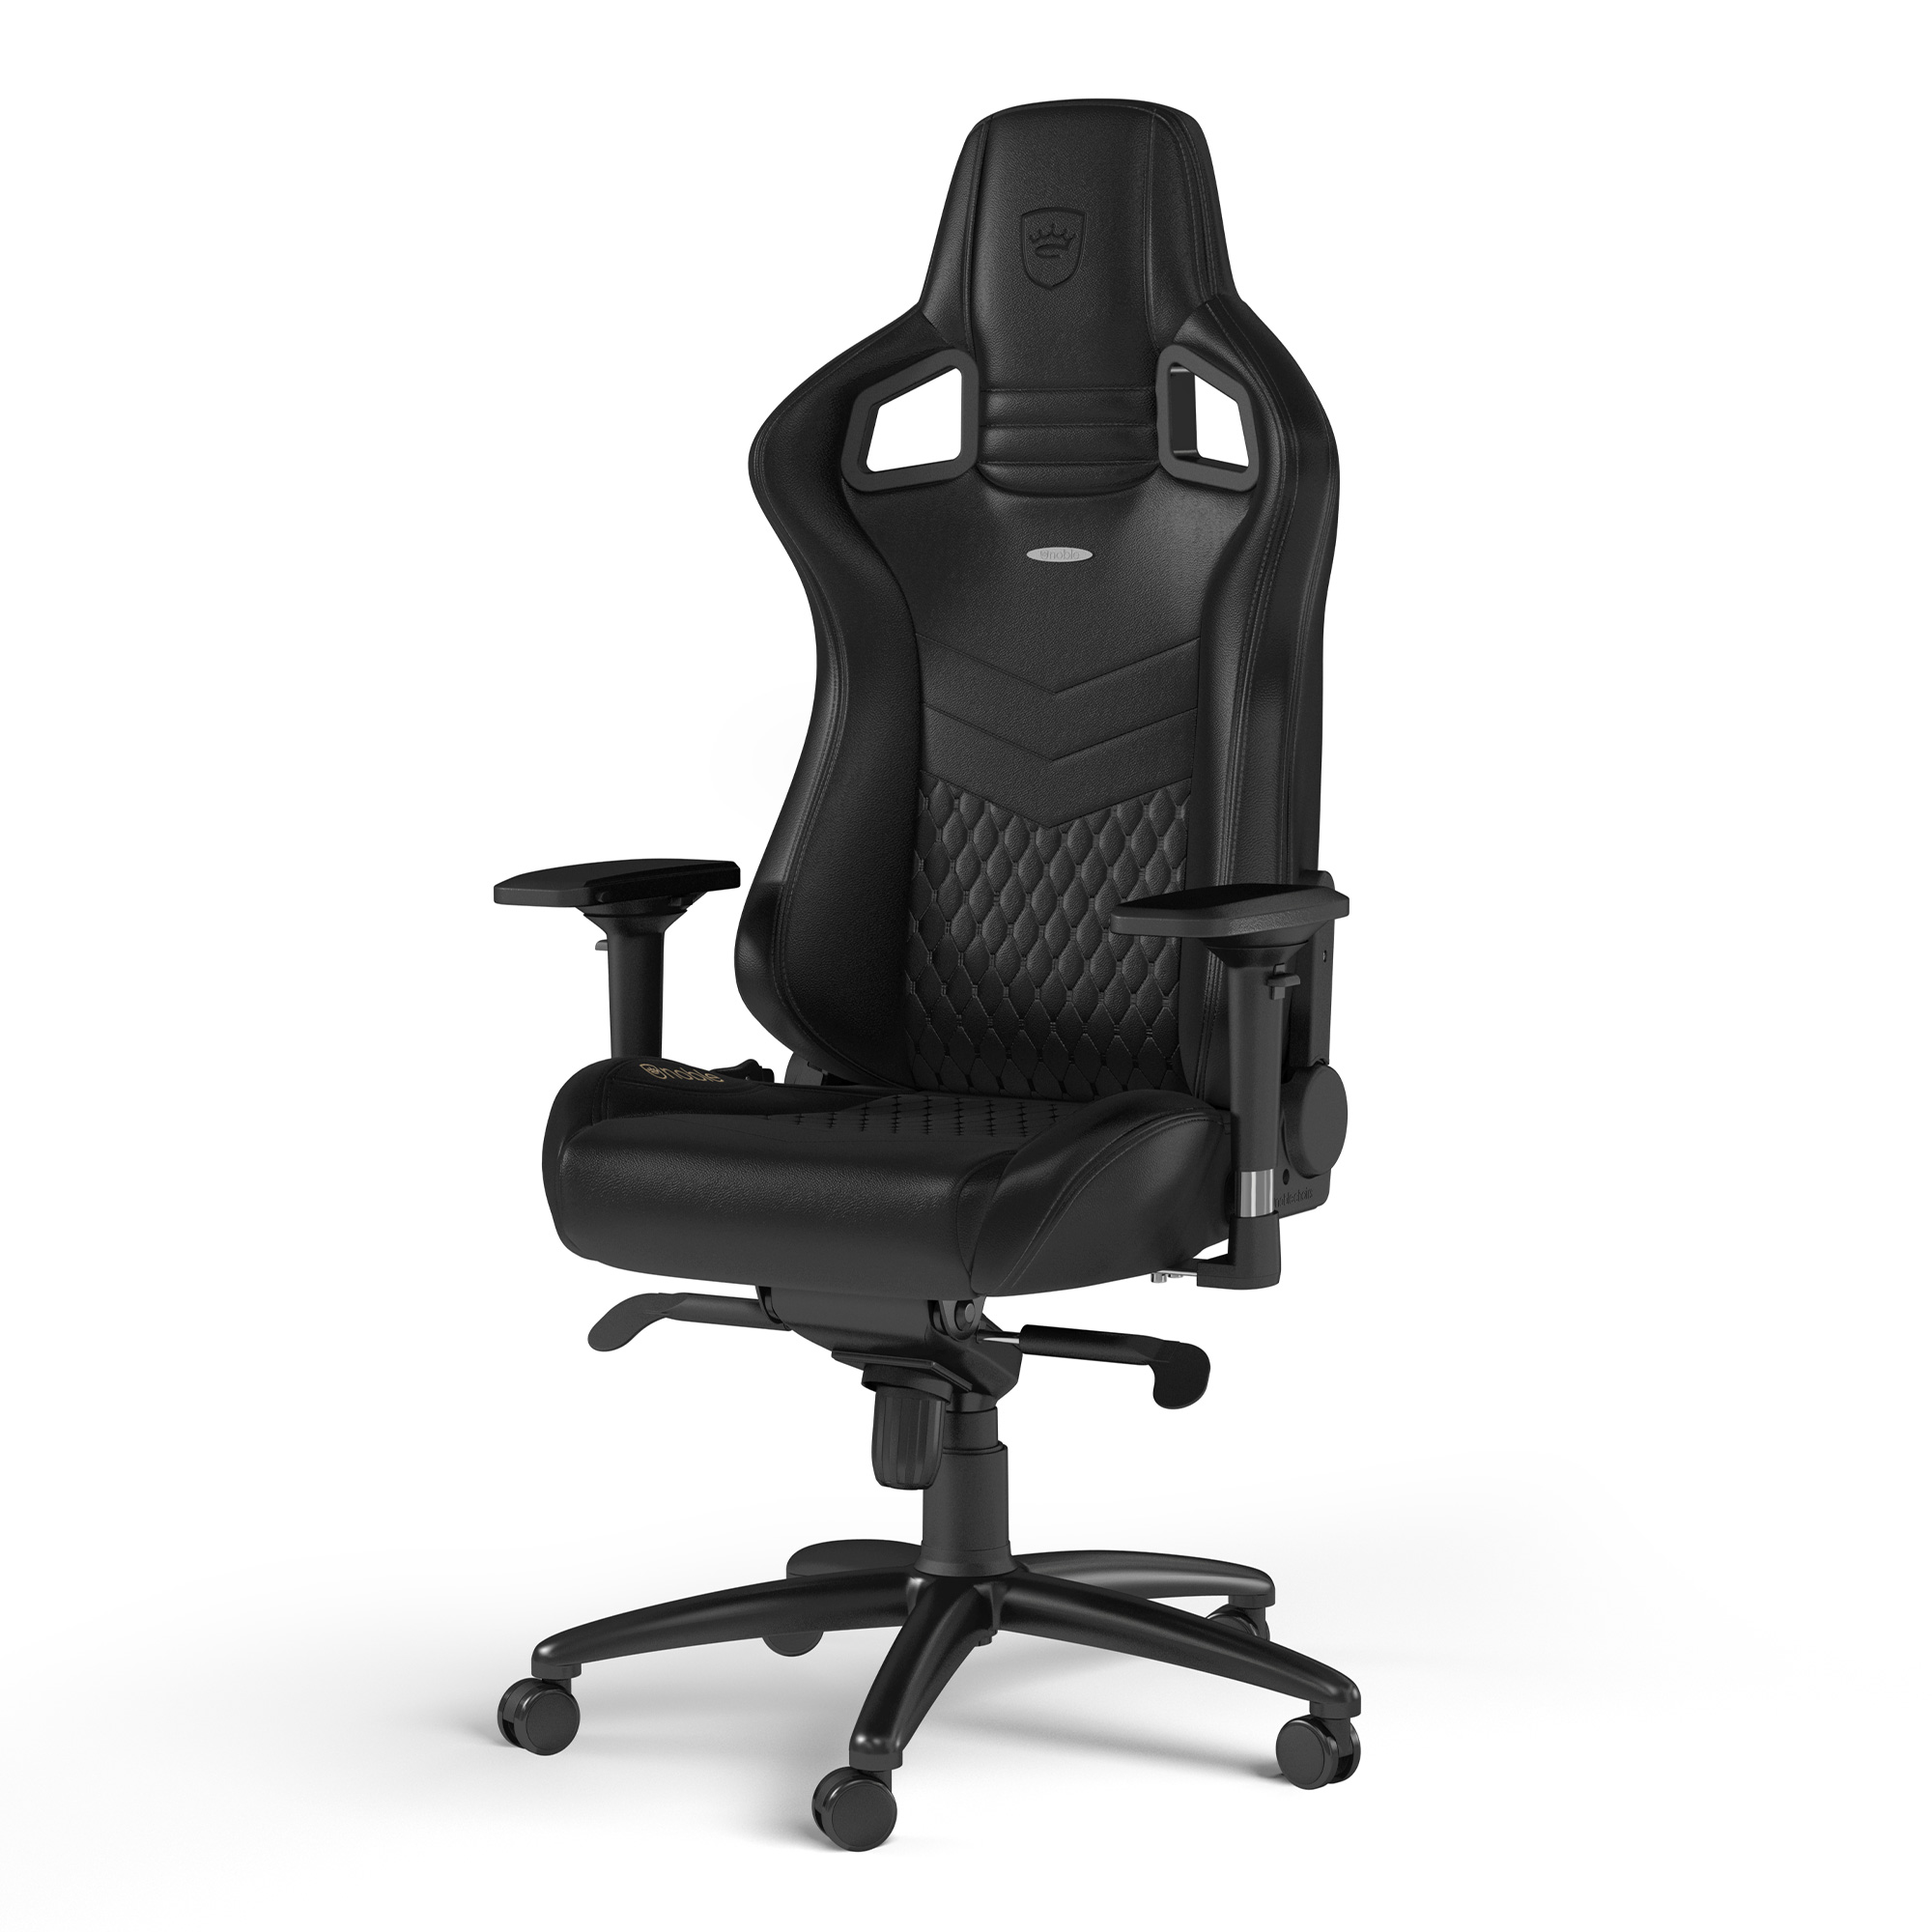  - noblechairs EPIC Real Leather Gaming Chair - Black